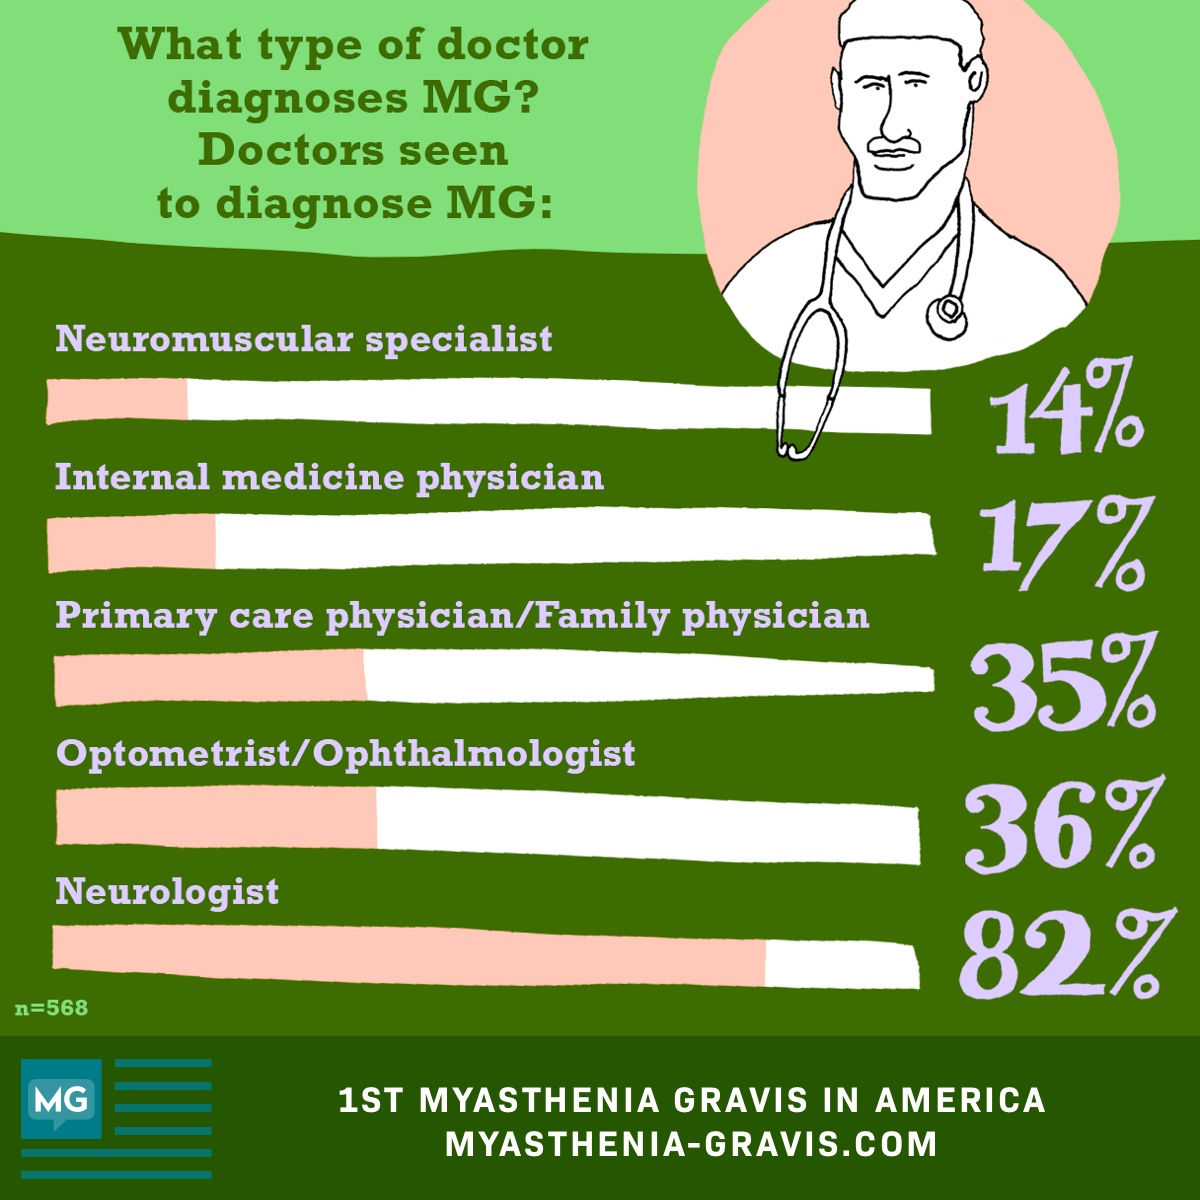 The type of doctors seen to diagnose MG most often include neurologists, ophthalmologists, and primary care physicians.